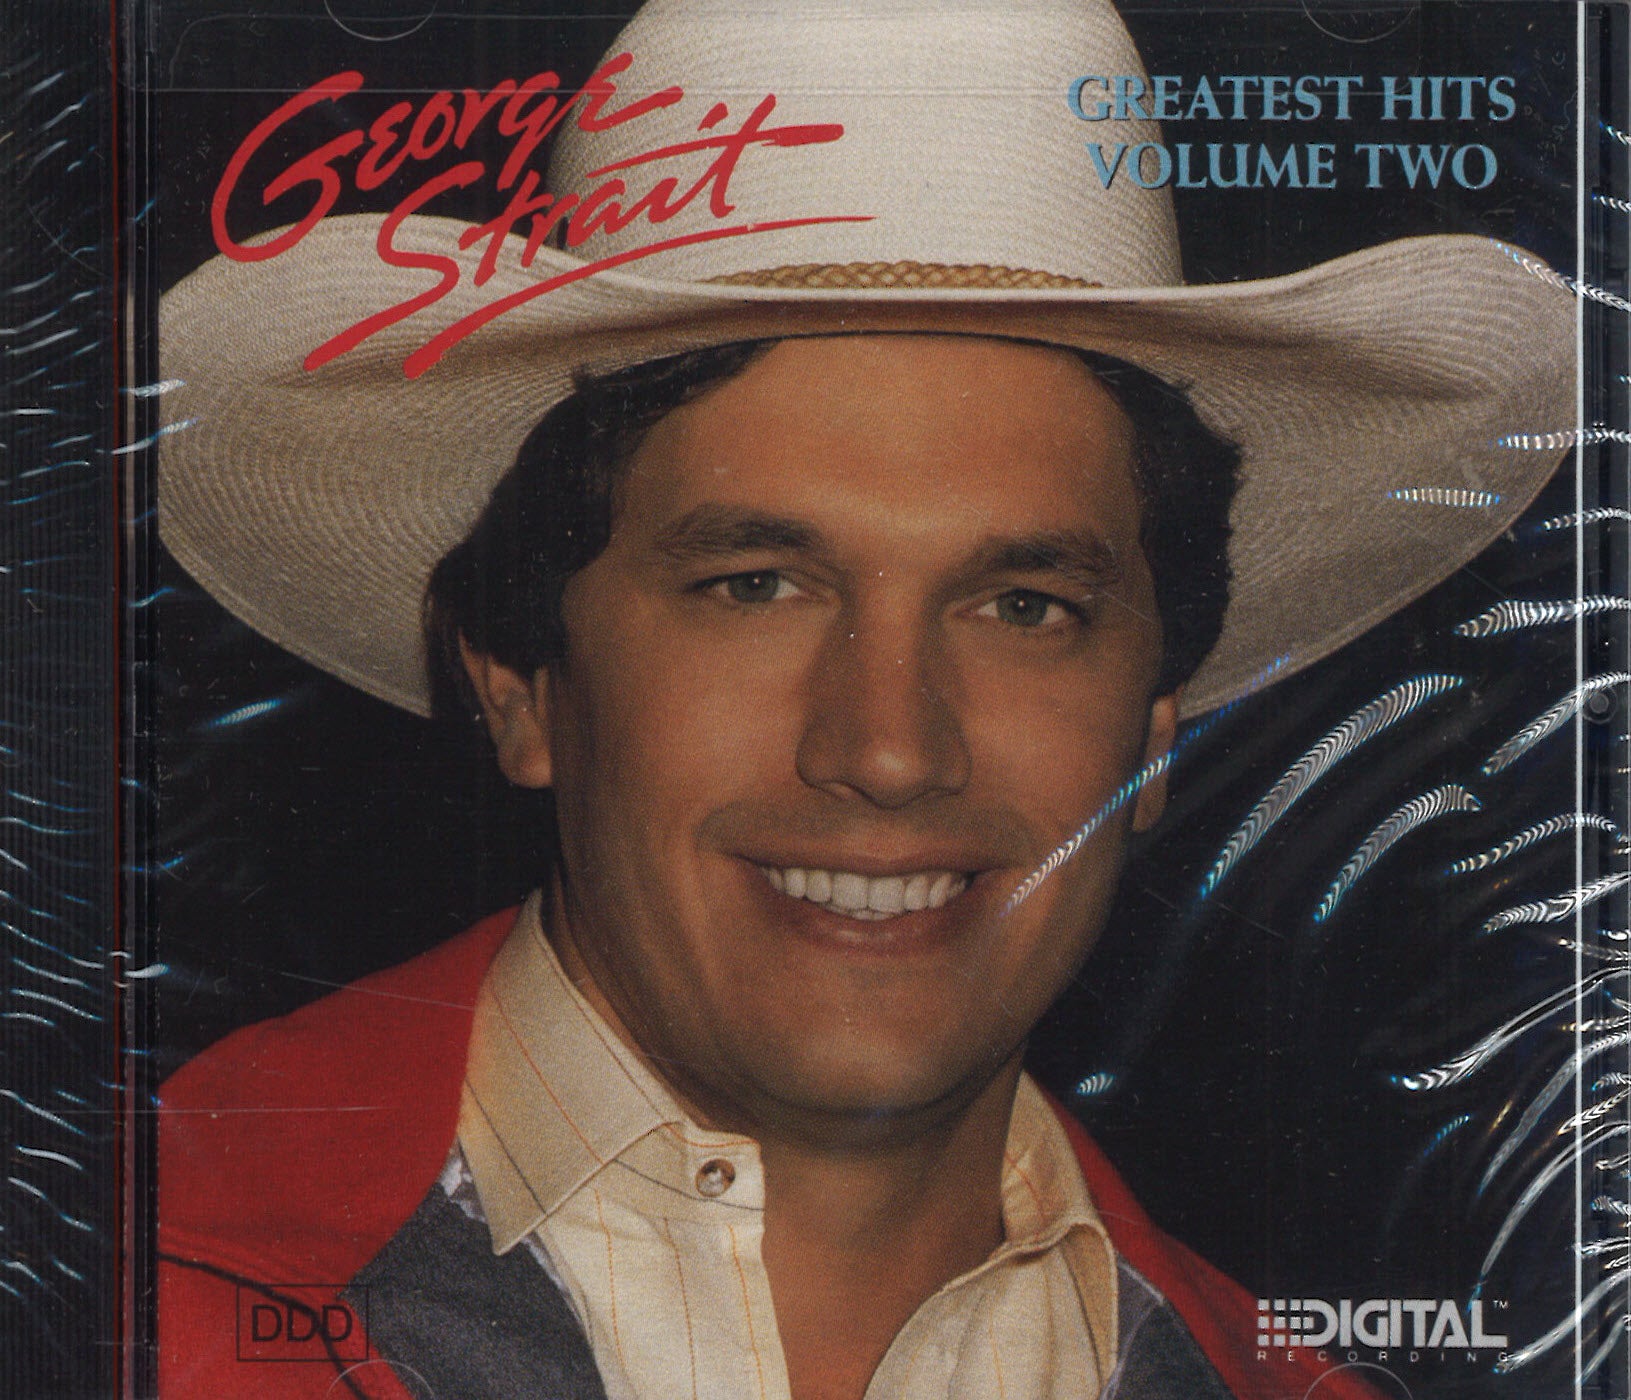 George Strait Greatest Hits Volume Two